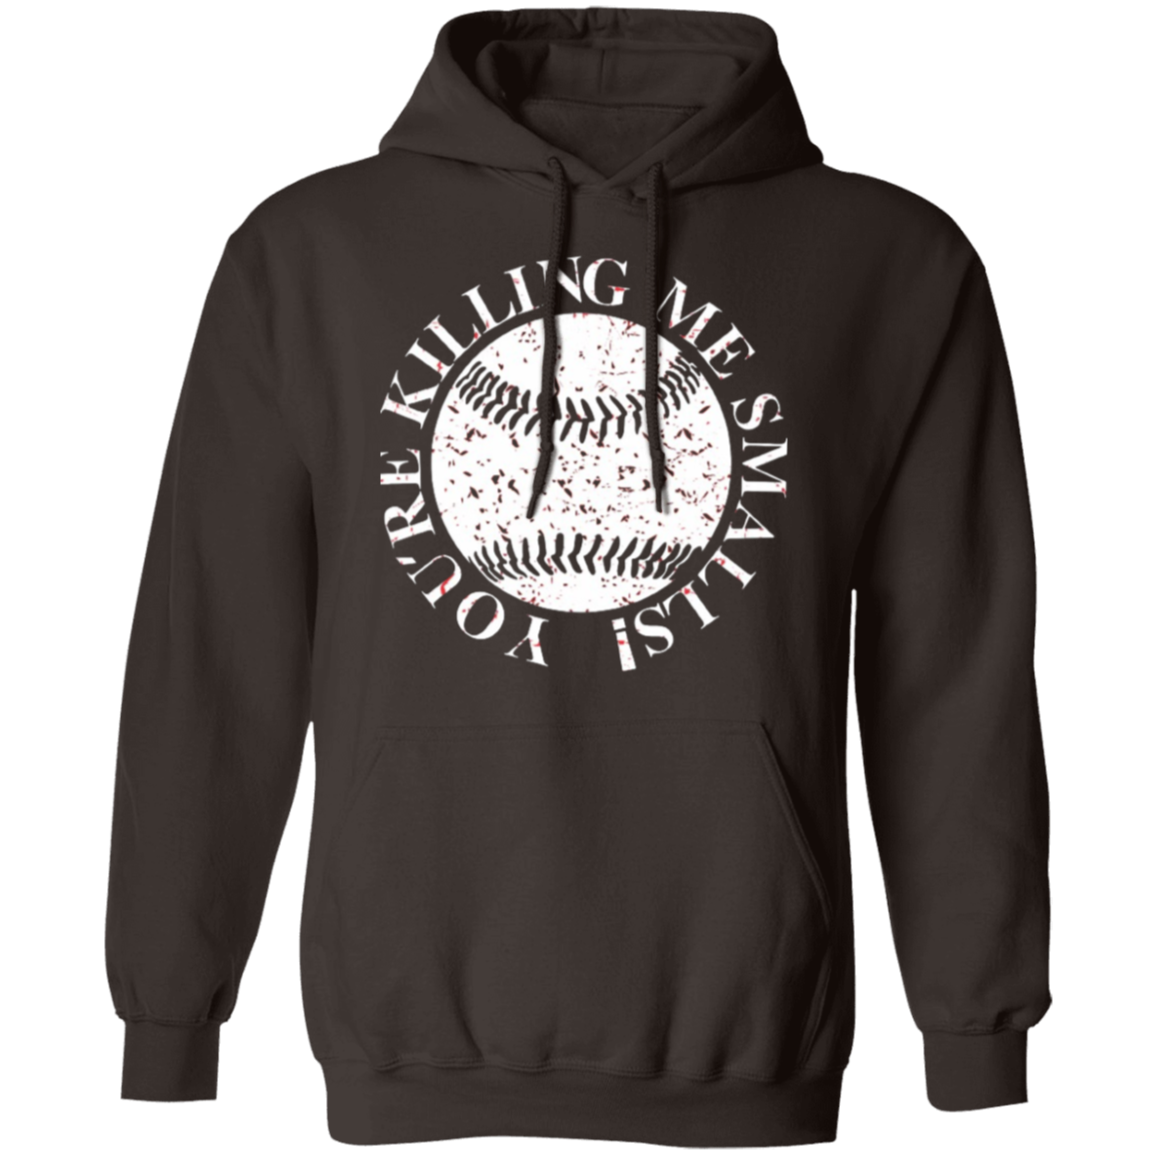 You are Killing Me Smalls! Premium Unisex Hoodies - Game Day Getup